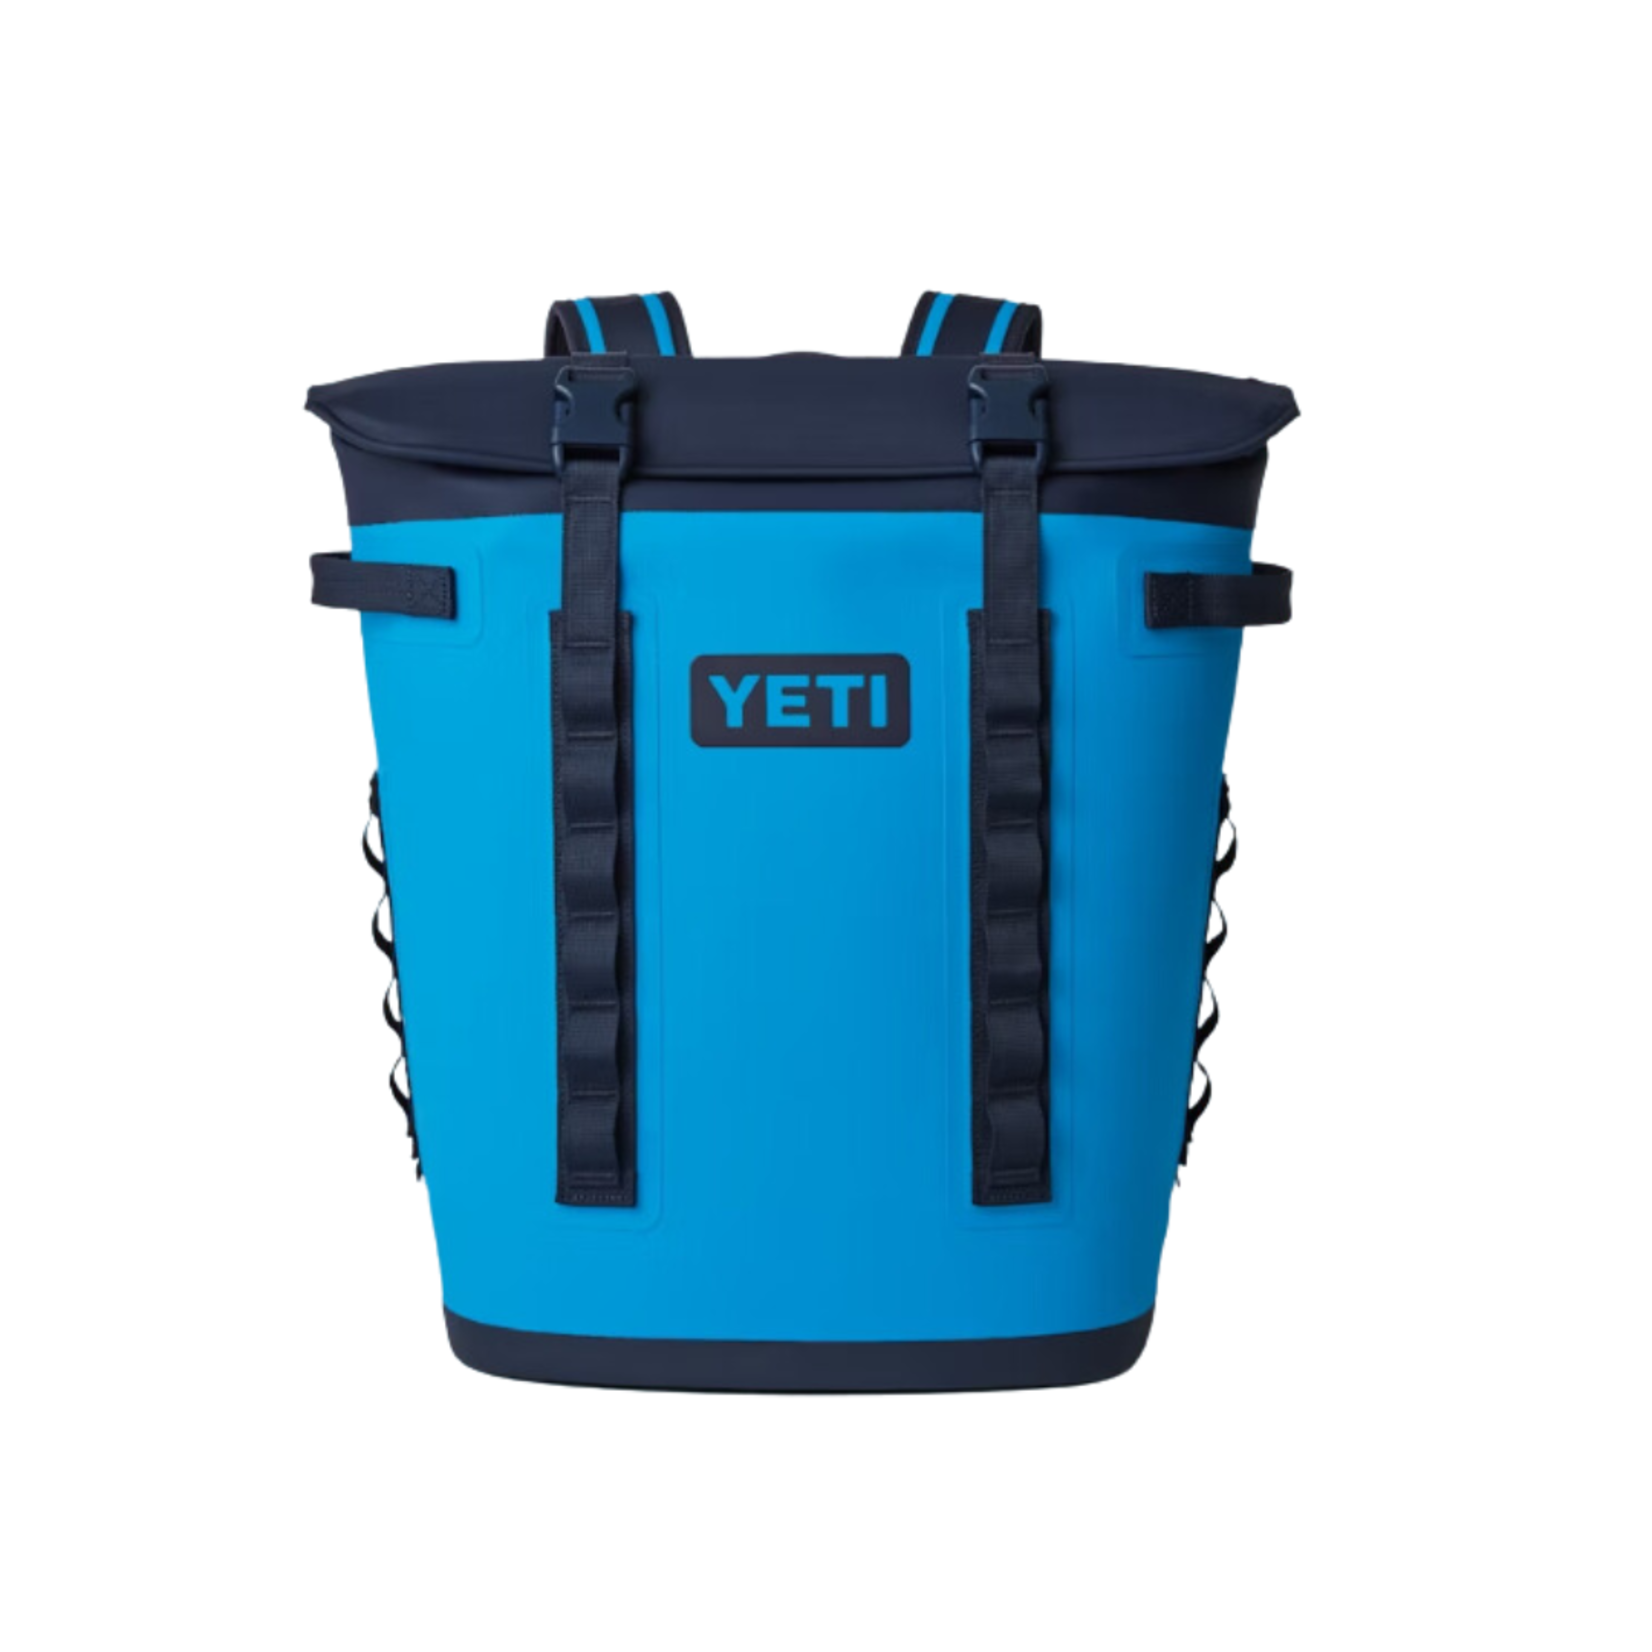 YETI M20 Backpack Cooler